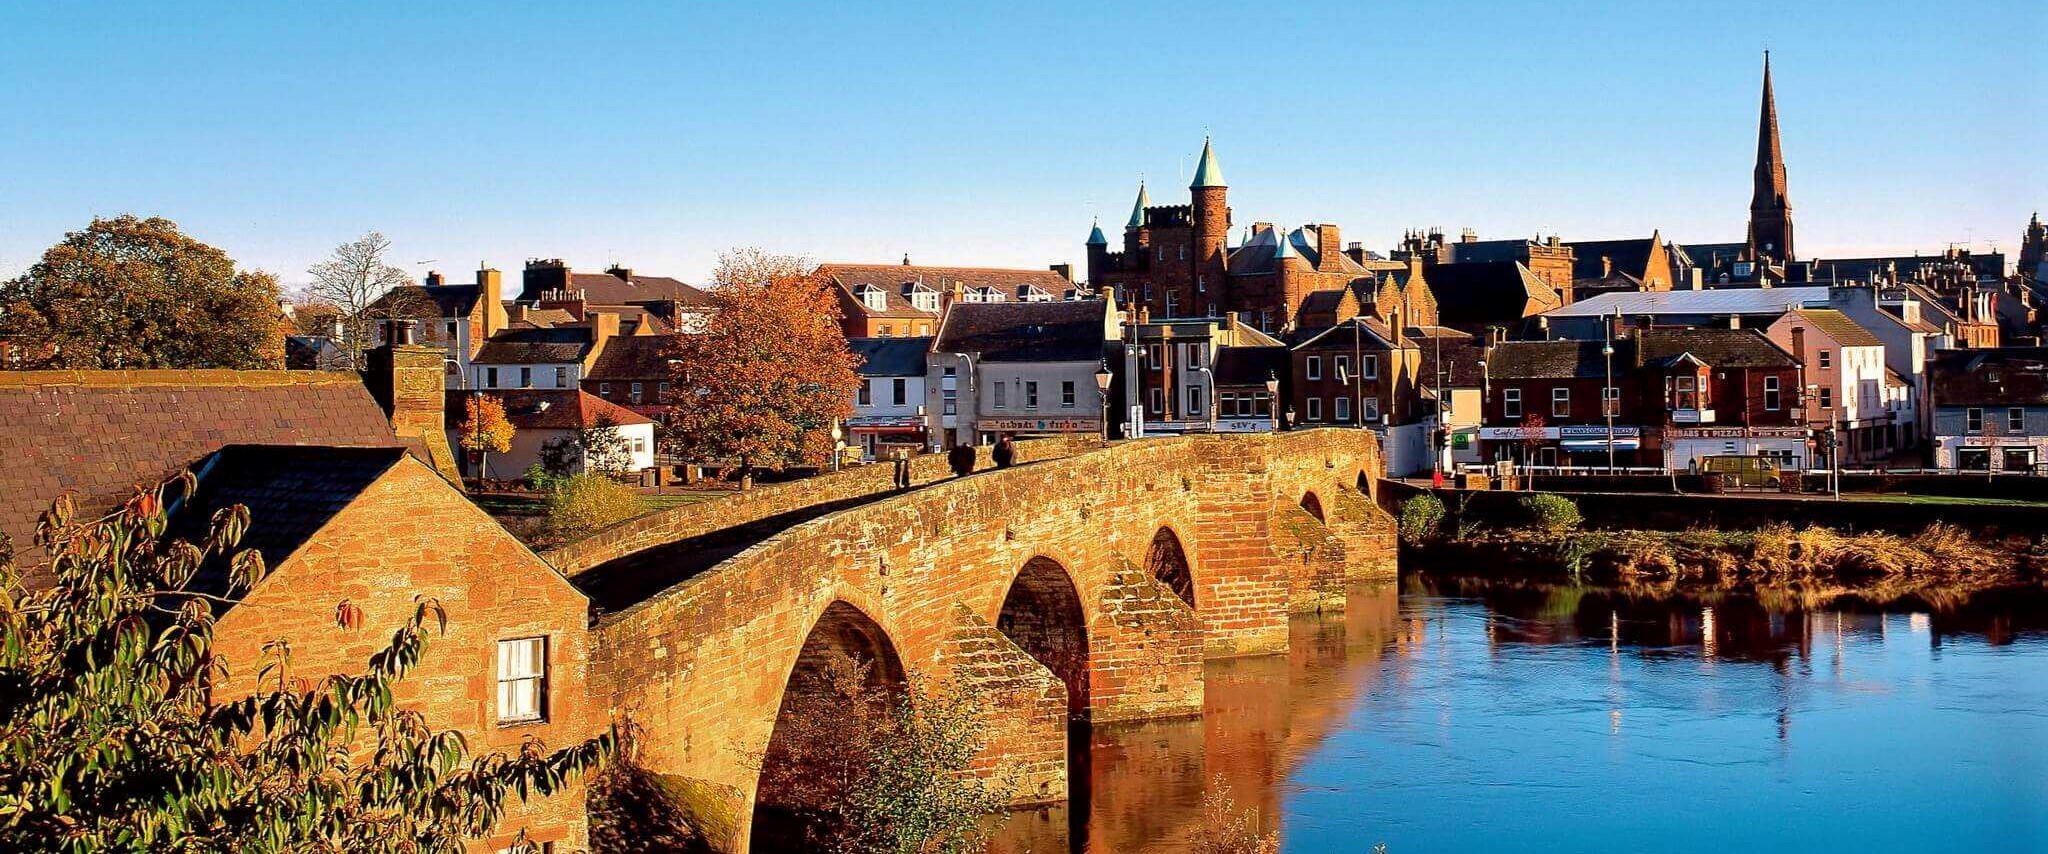 Looking Across The River Nith To The Devorgilla Bridge In The Town Of Dumfries